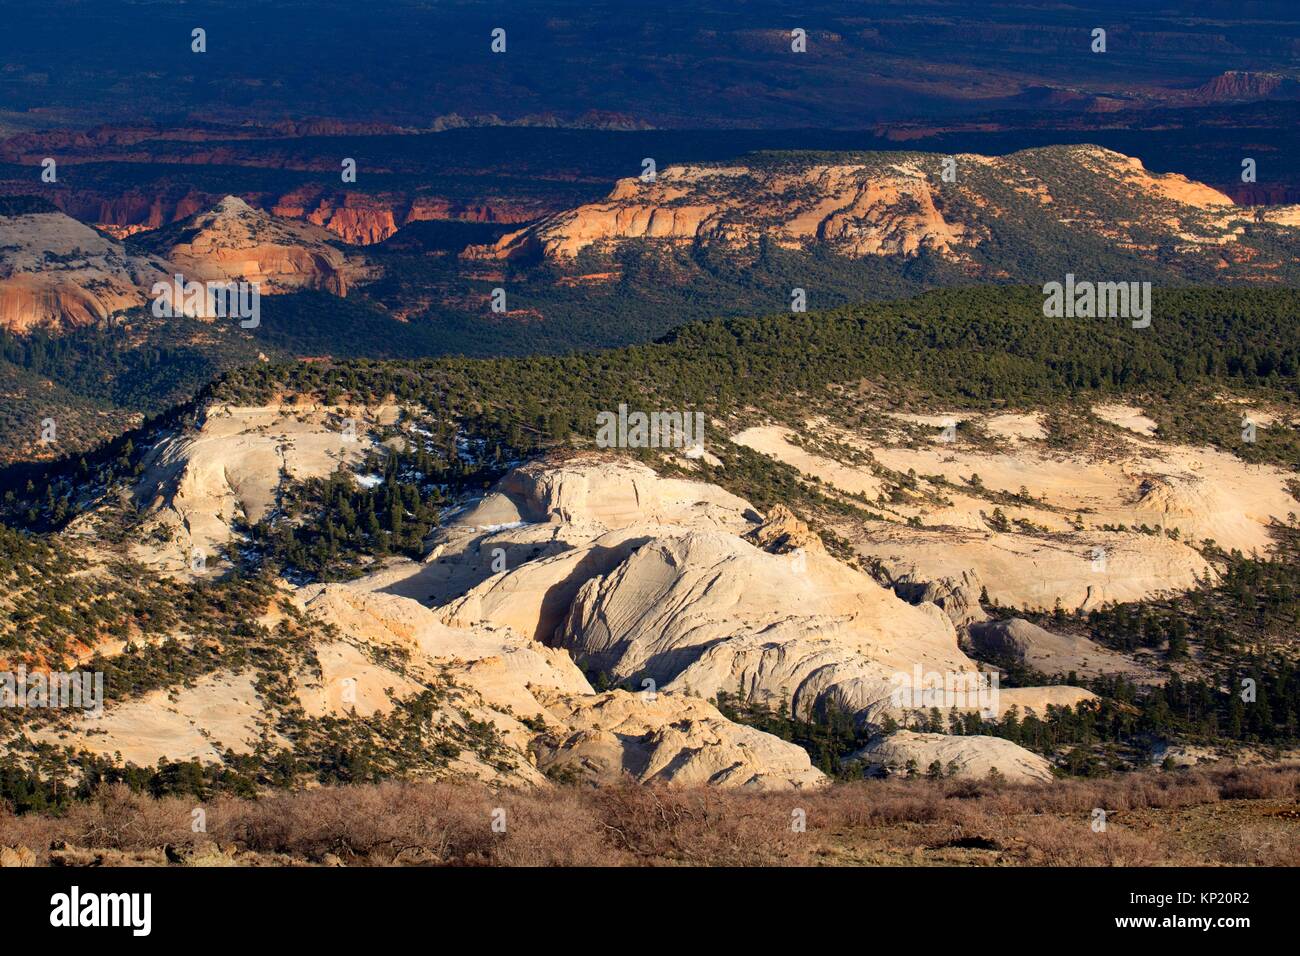 High desert view, Dixie National Forest, Highway 12 Scenic Byway, Utah. Stock Photo